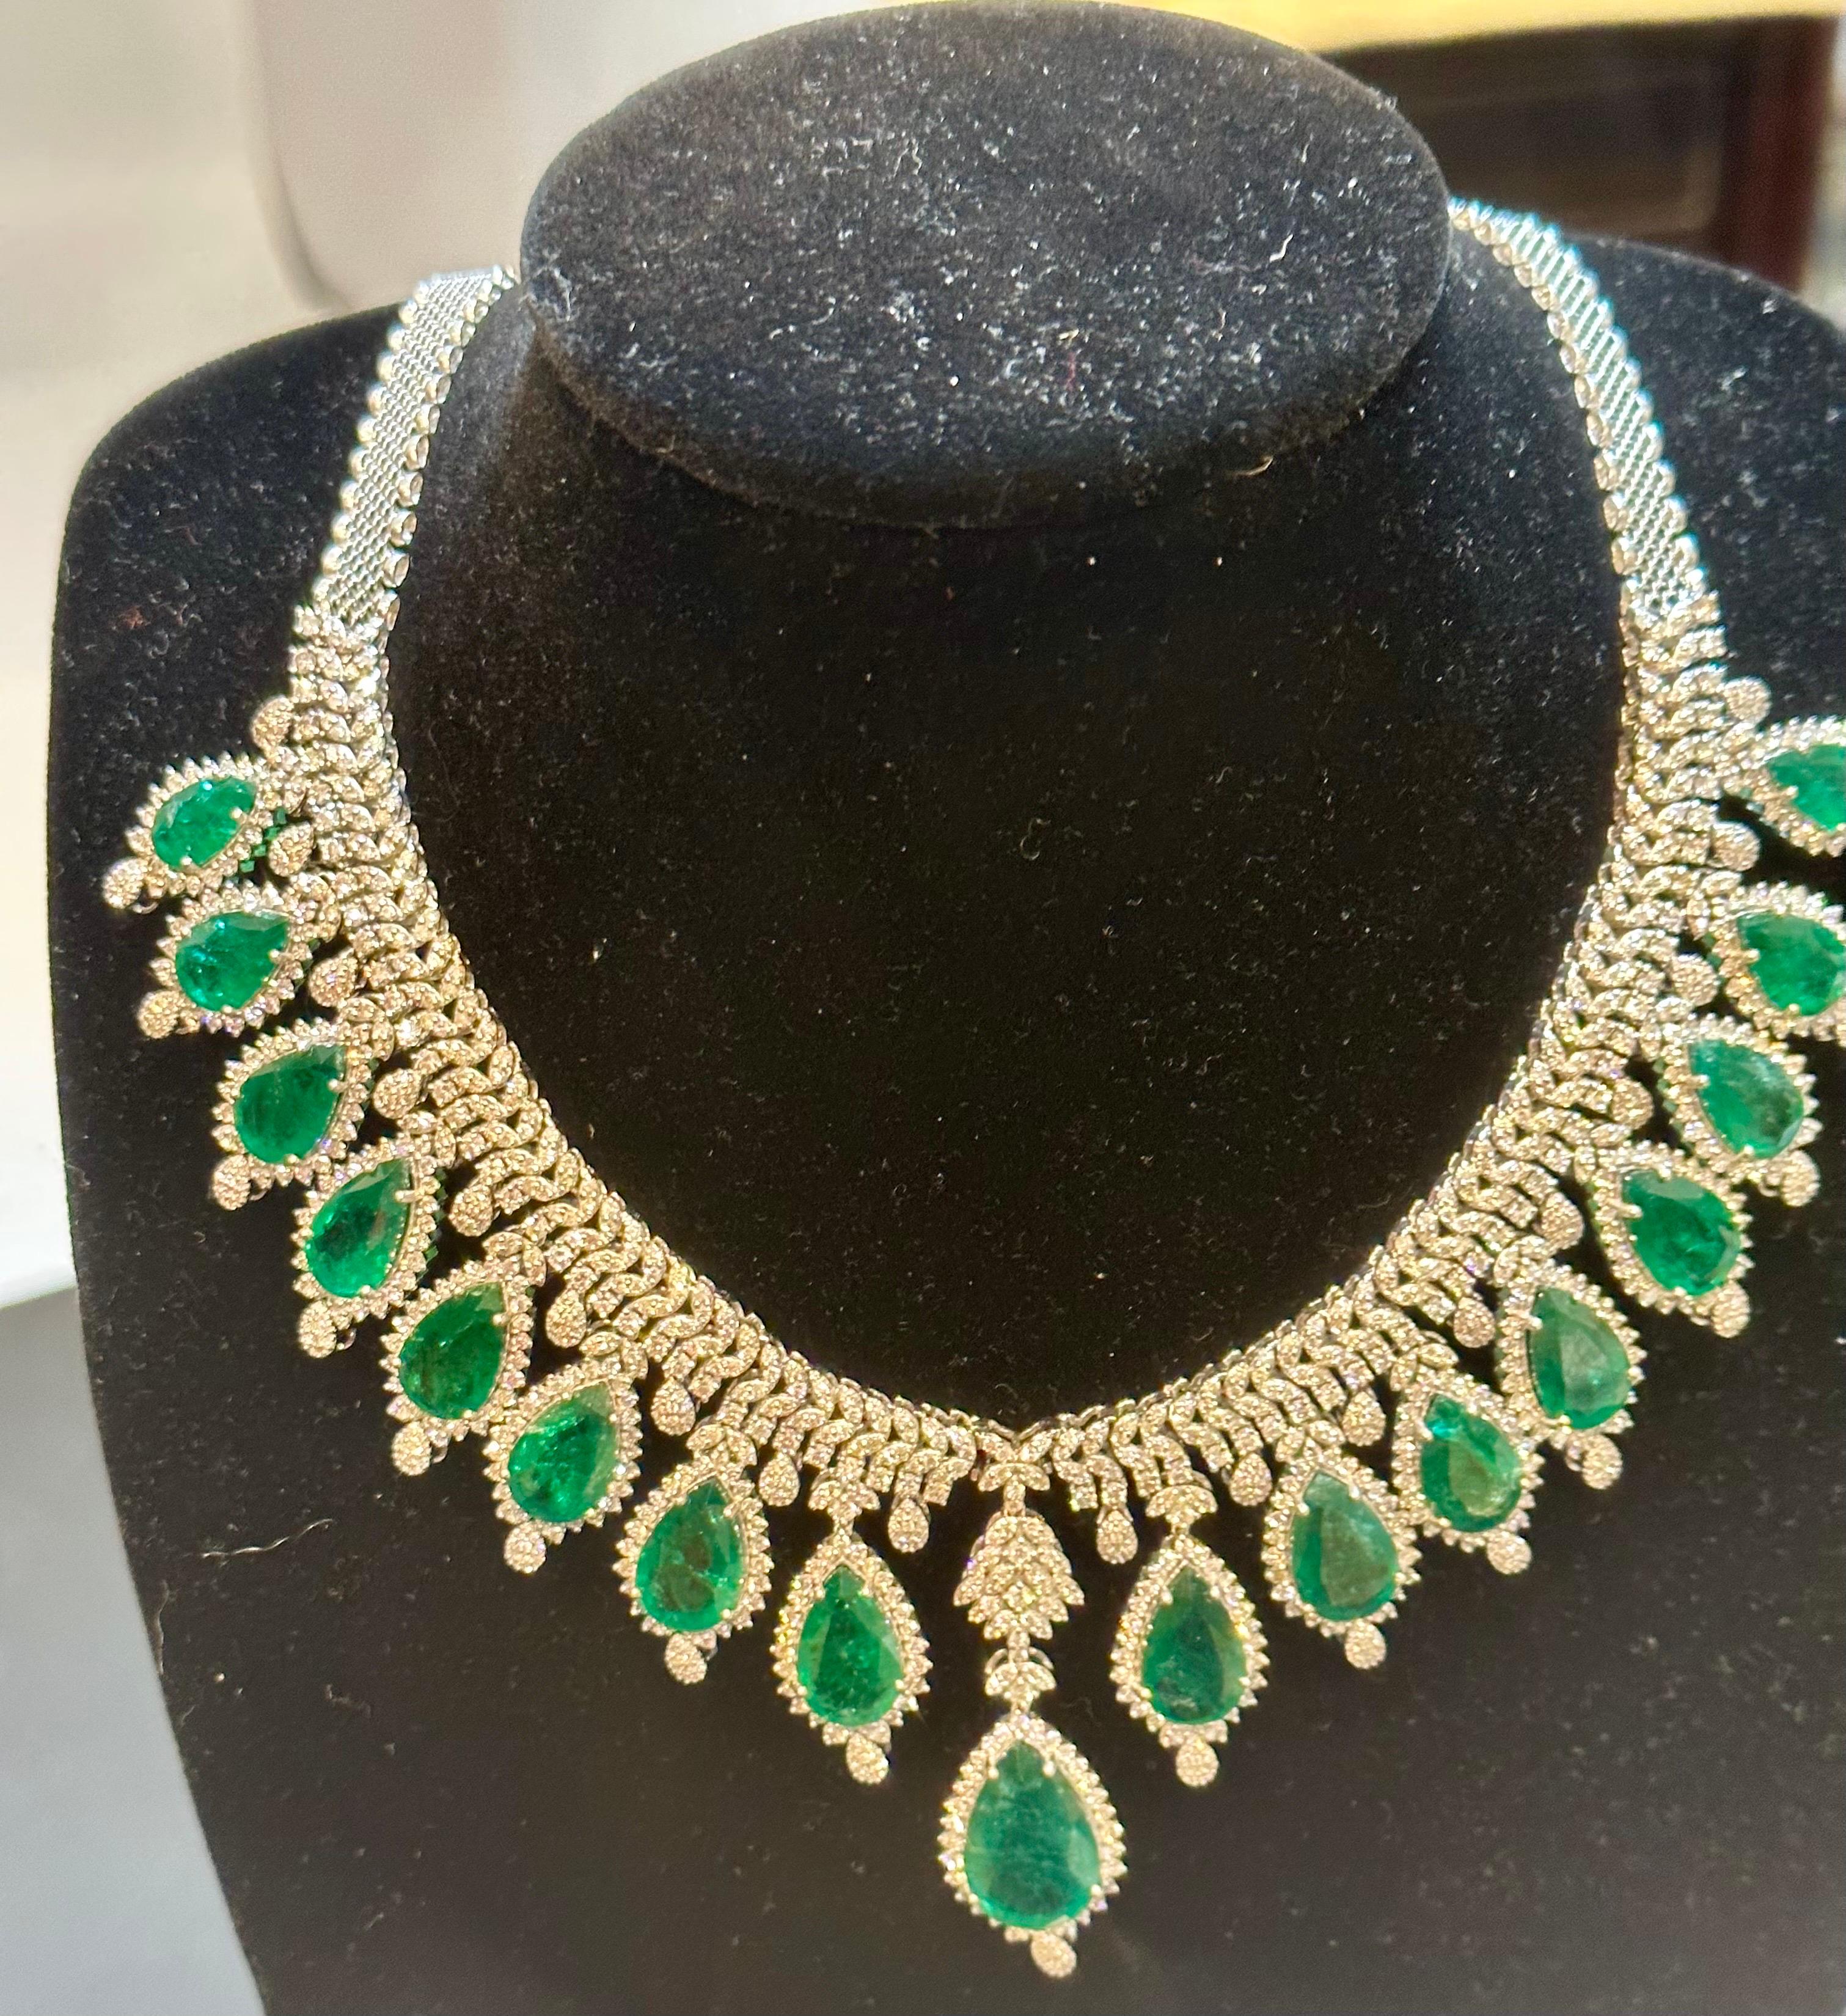 Women's 73ct Zambian Emerald and 22ct Diamond Necklace and Earring Bridal Suite For Sale